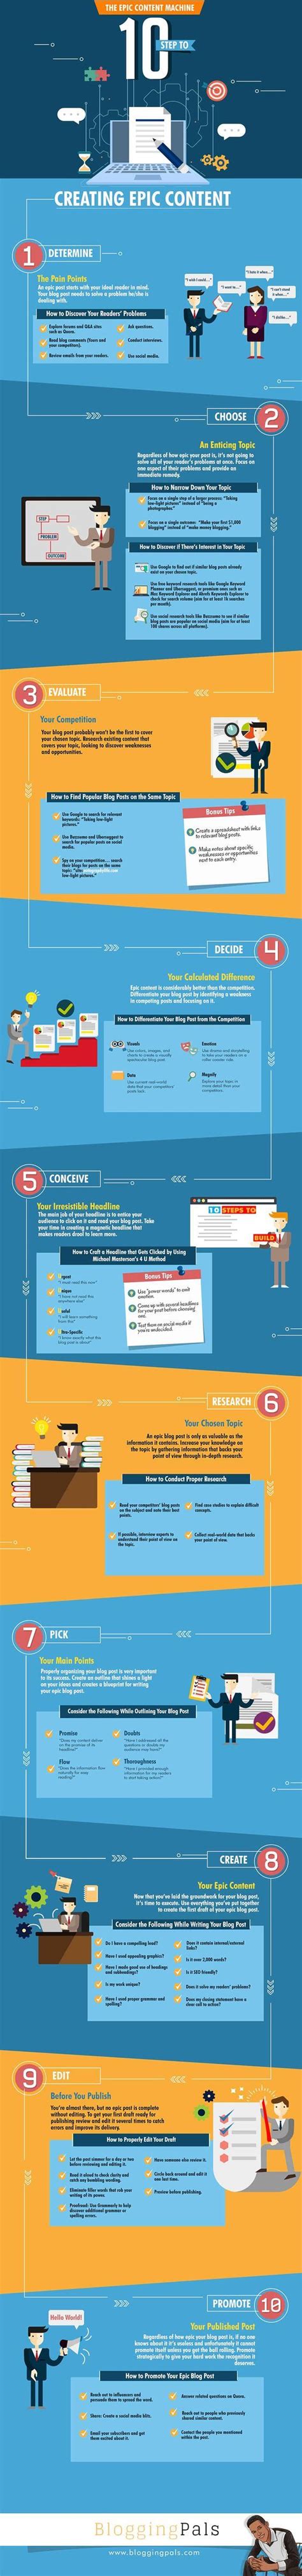 Epic Content Tips! | Infographic marketing, Infographic, Social media infographic